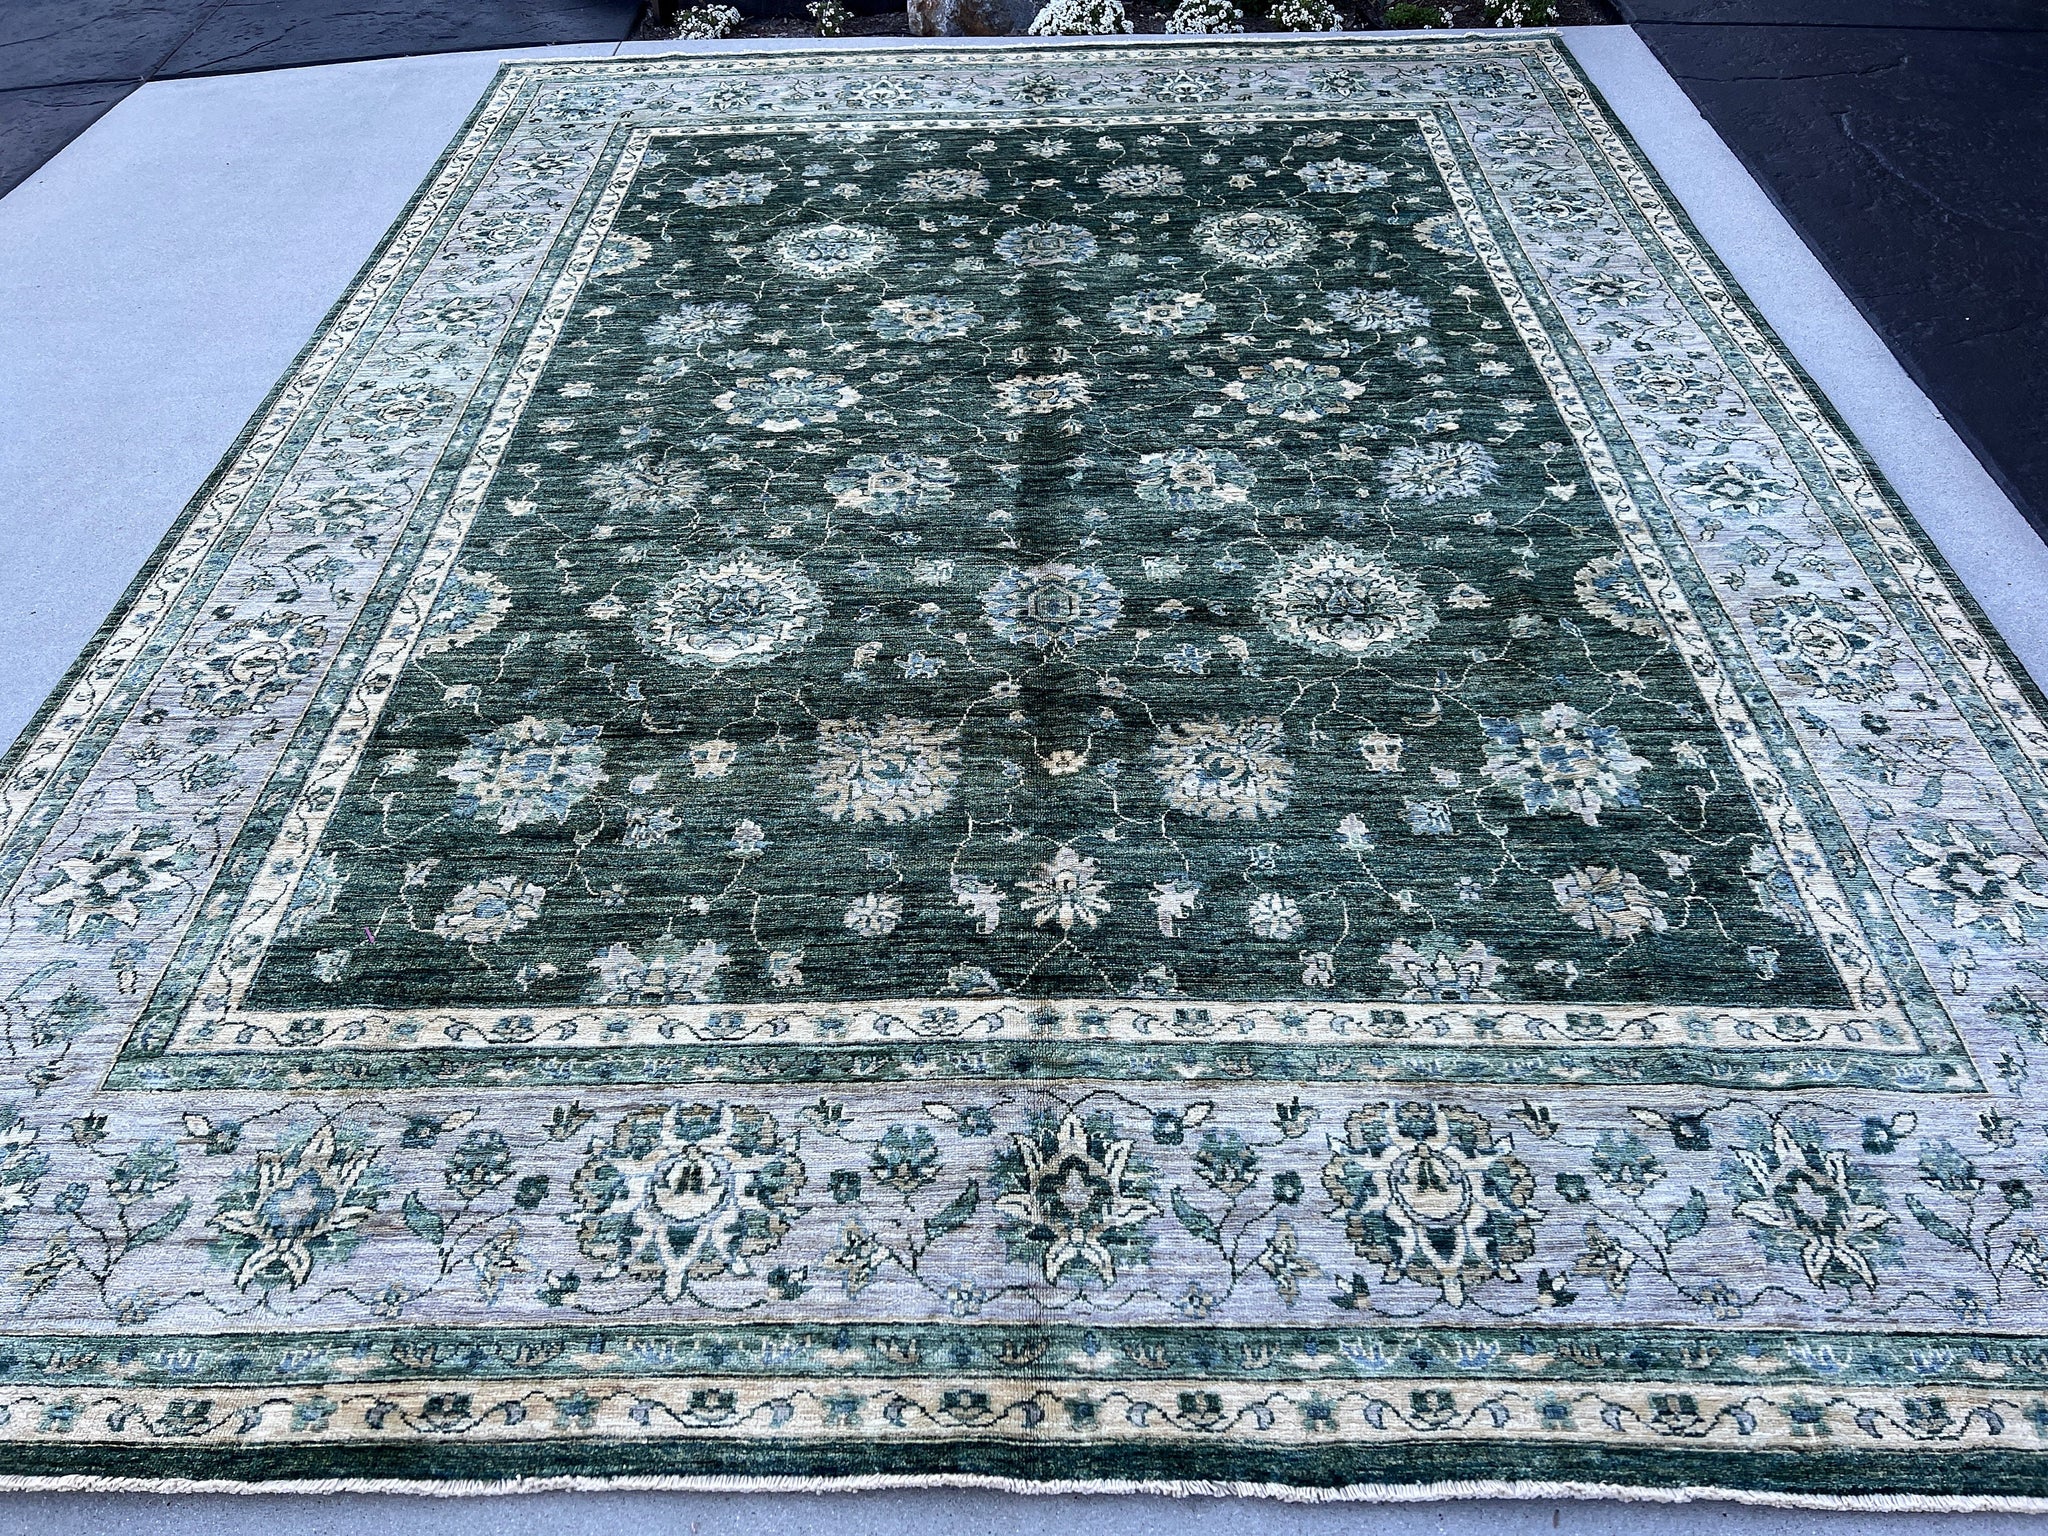 8x11 Handmade Afghan Rug | Forest Green Grey Cream Charcoal | Turkish Oushak Vintage Persian Tribal Floral Hand Knotted Wool Modern Tribal